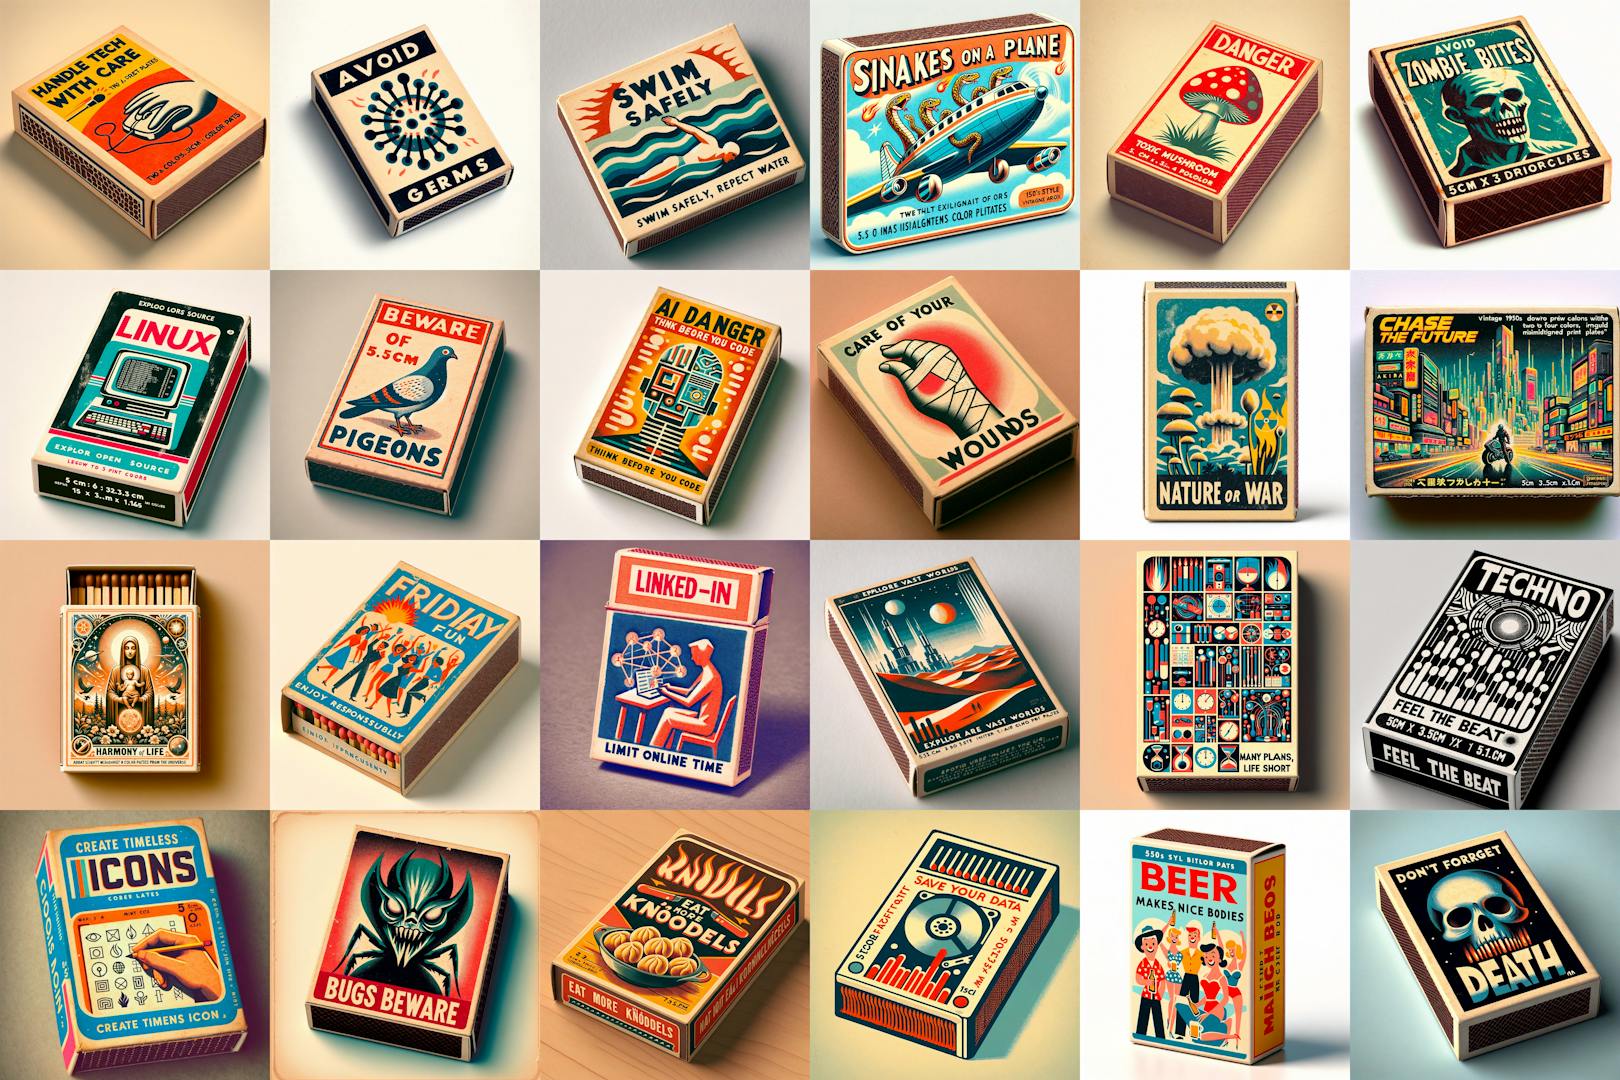 A set of many matchboxes, each with a different design, generated by the Vintage Matchbox Generator.